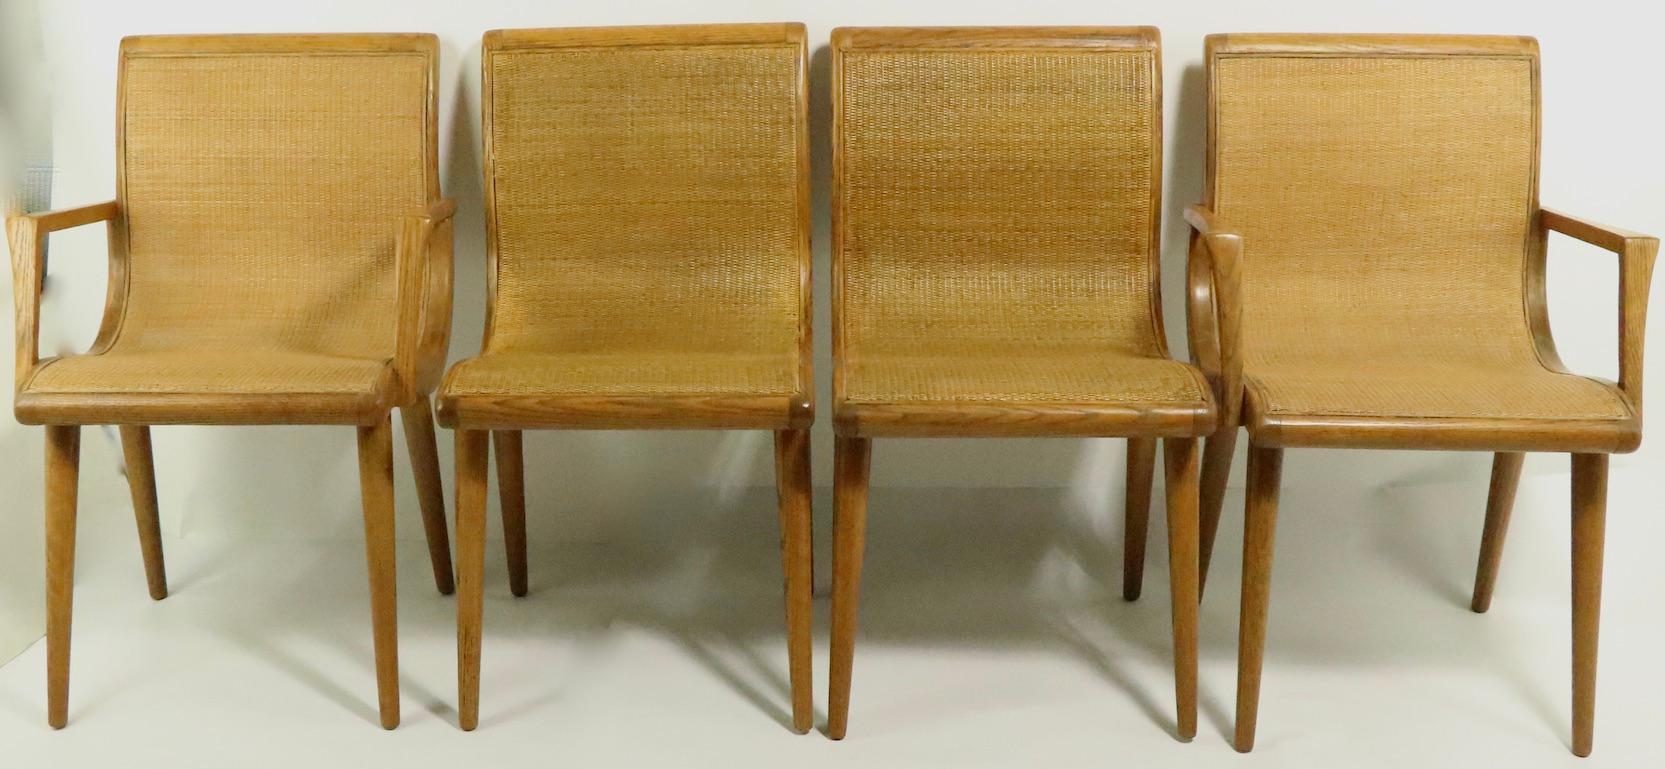 Stylish midcentury set of four dining chairs, designed by Jack Van der Molen for the Jamestown Lounge Company, as part of the Classic Americana Casual series. This set consists of 2 arm, and 2 armless chairs, all are in very good, original